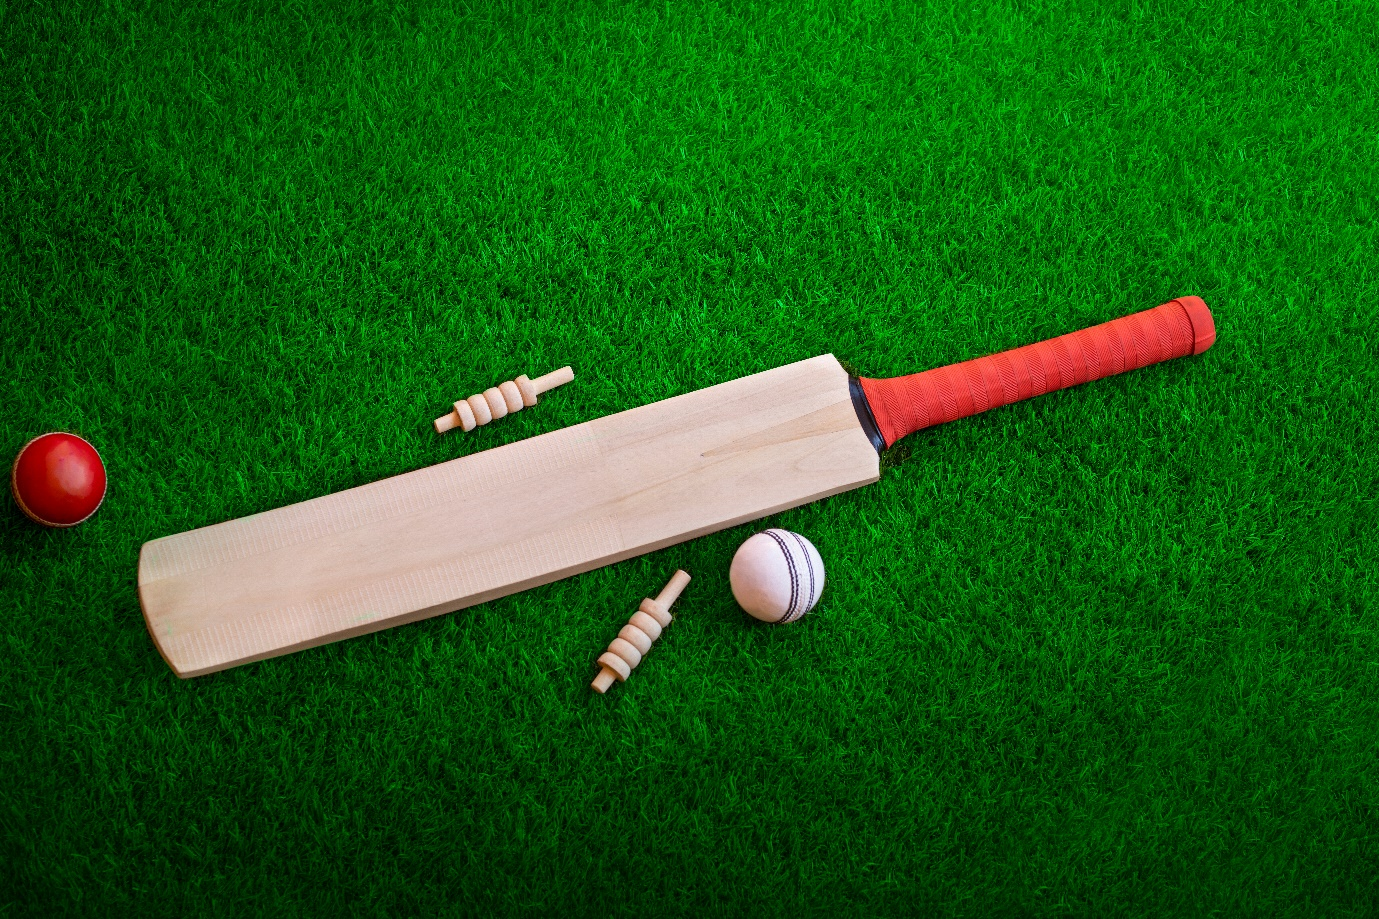 cricket ball and bat placed on the ground